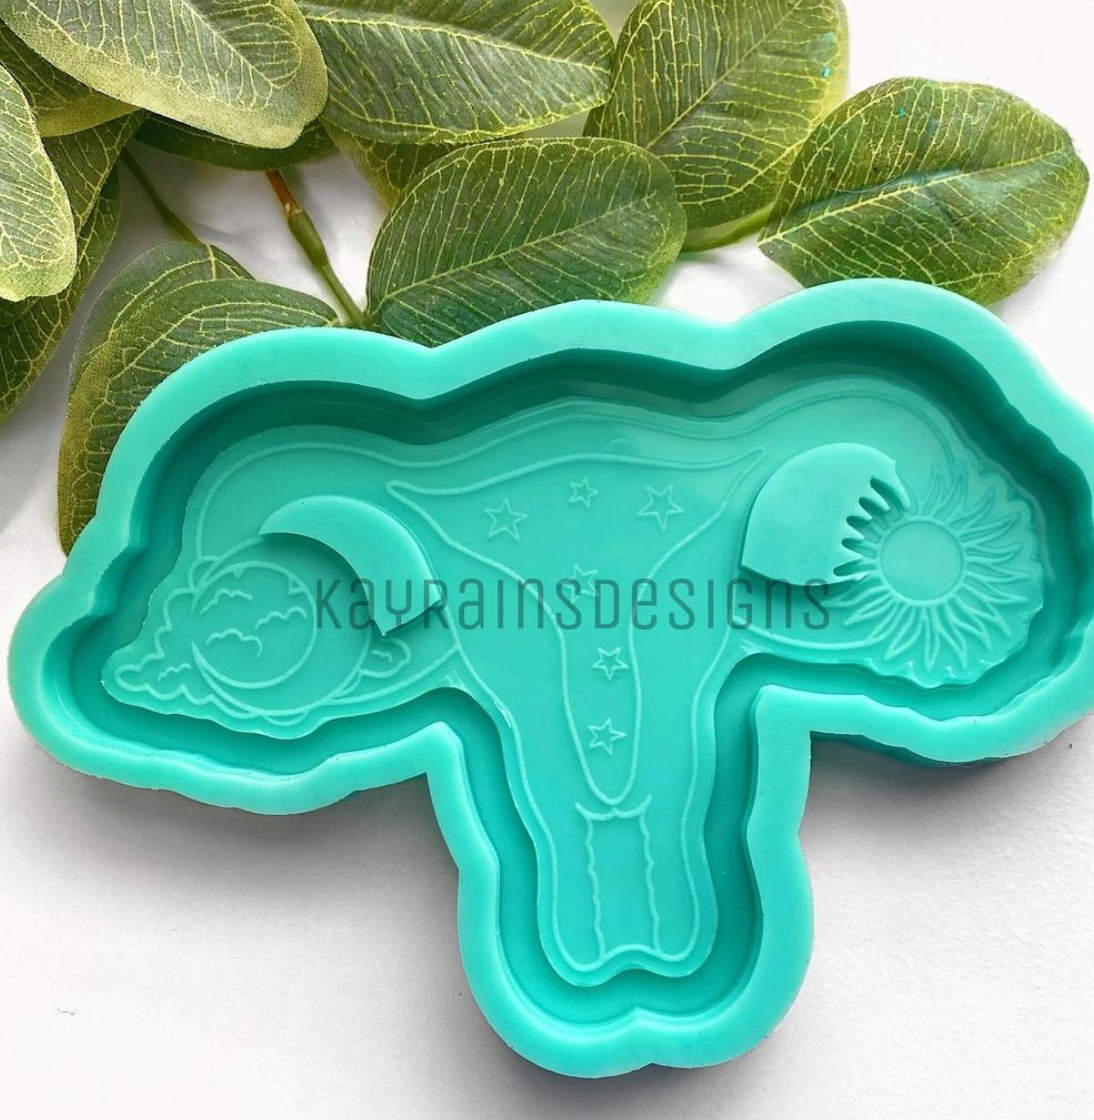 Female empowerment goddess tray silicone molds